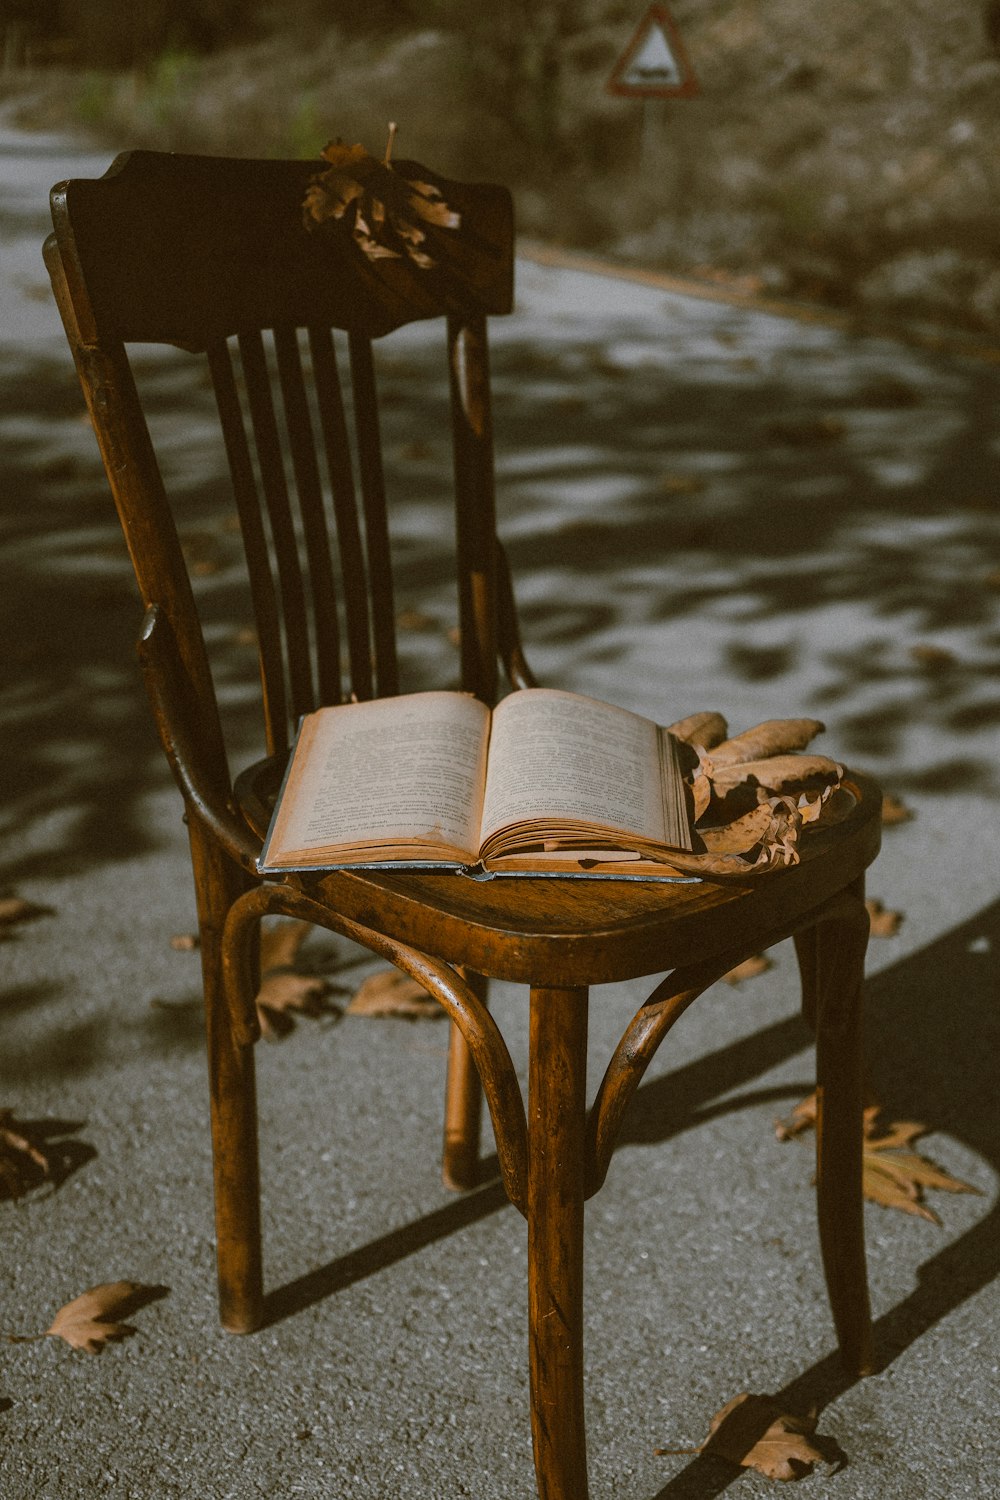 a wooden chair with an open book on it